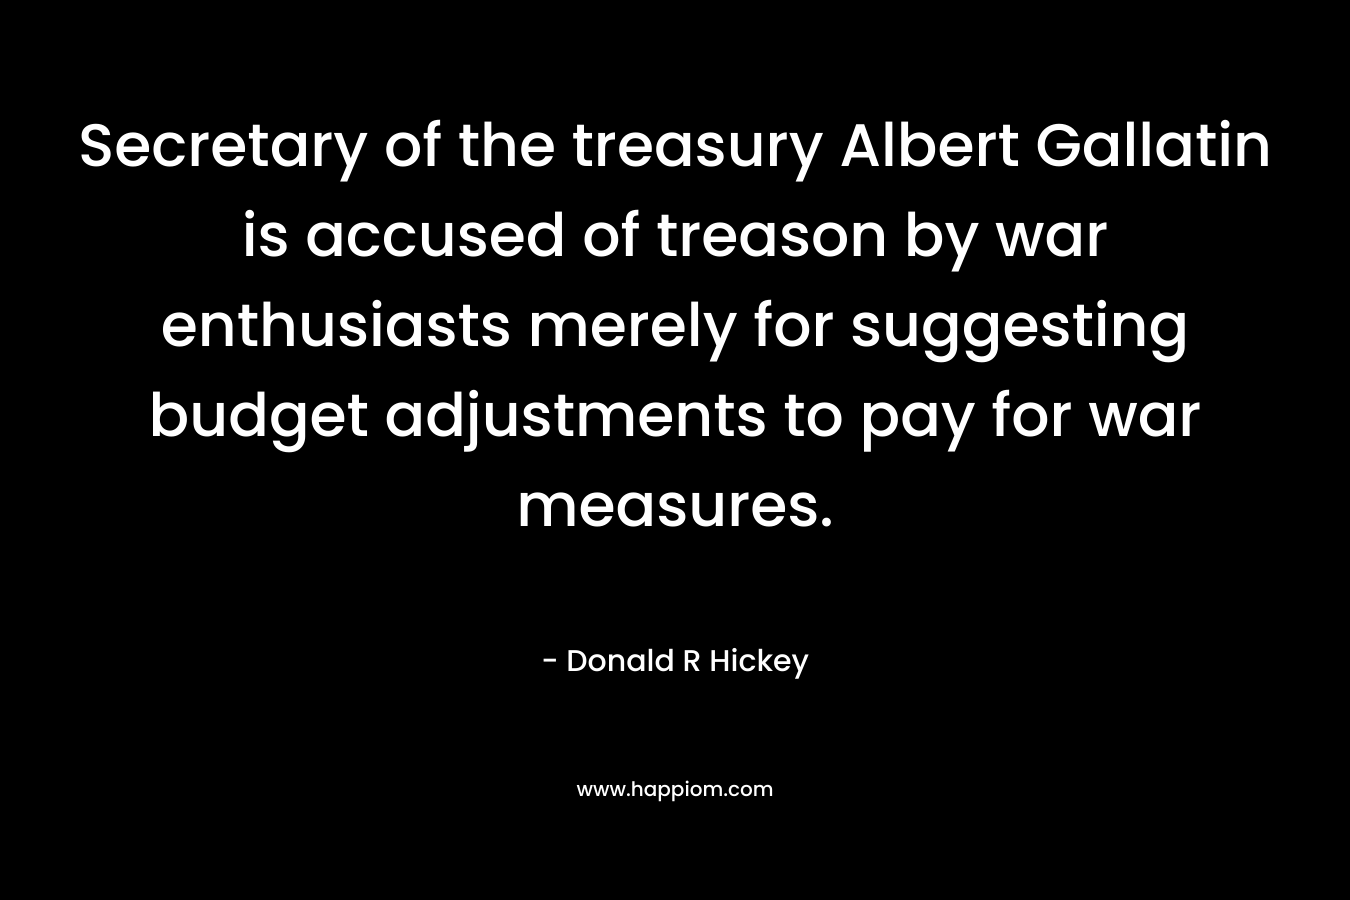 Secretary of the treasury Albert Gallatin is accused of treason by war enthusiasts merely for suggesting budget adjustments to pay for war measures. – Donald R Hickey